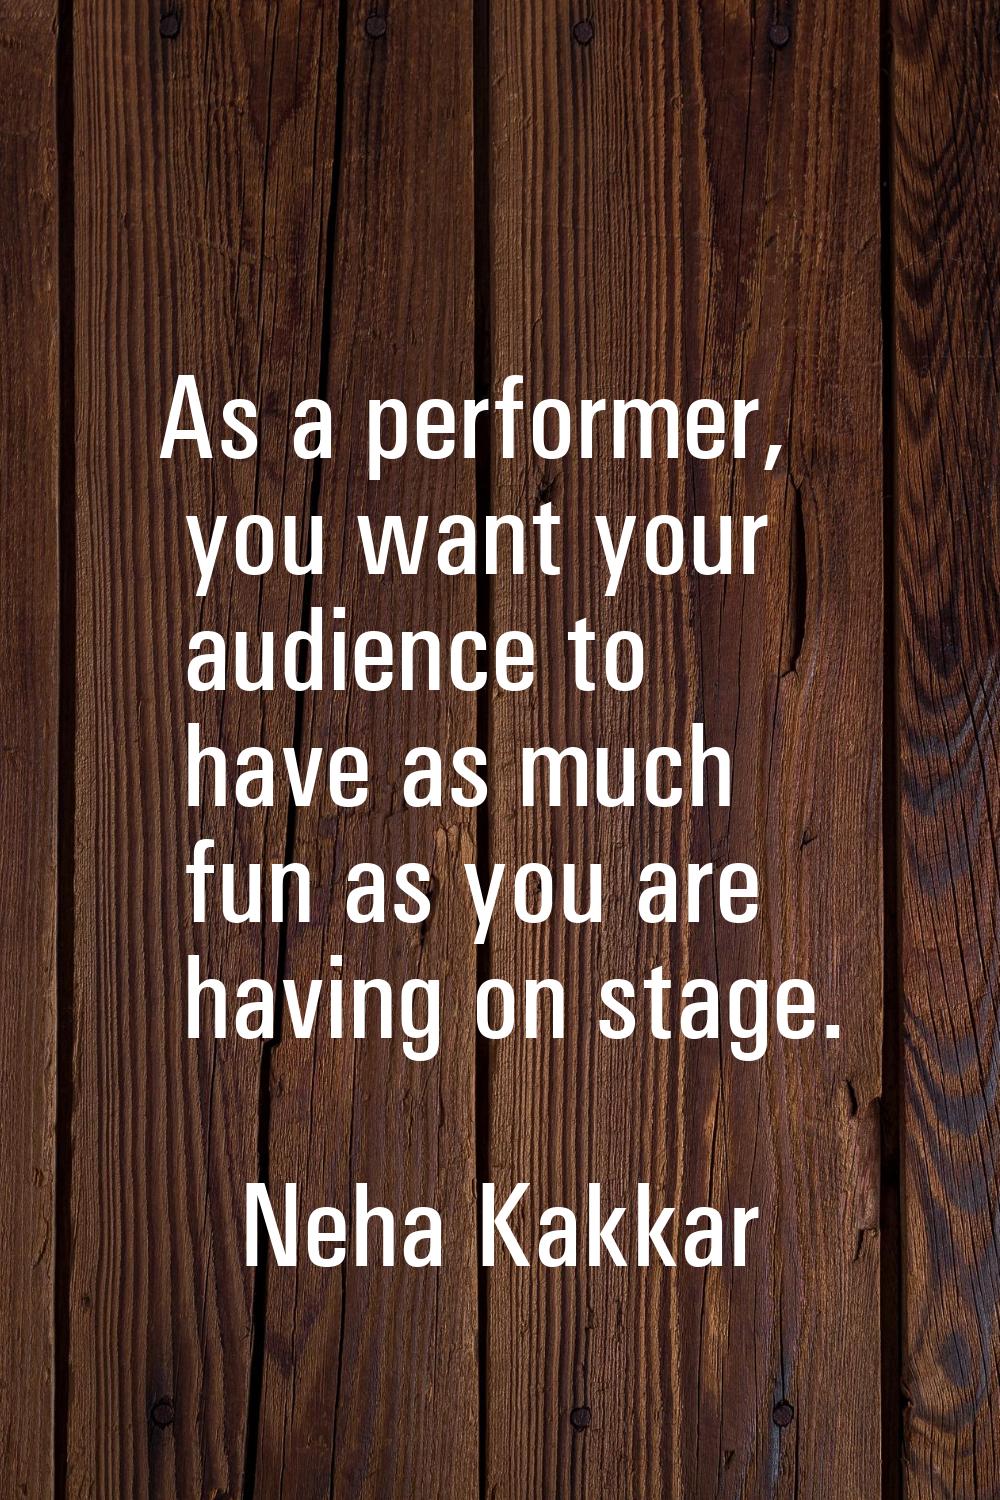 As a performer, you want your audience to have as much fun as you are having on stage.